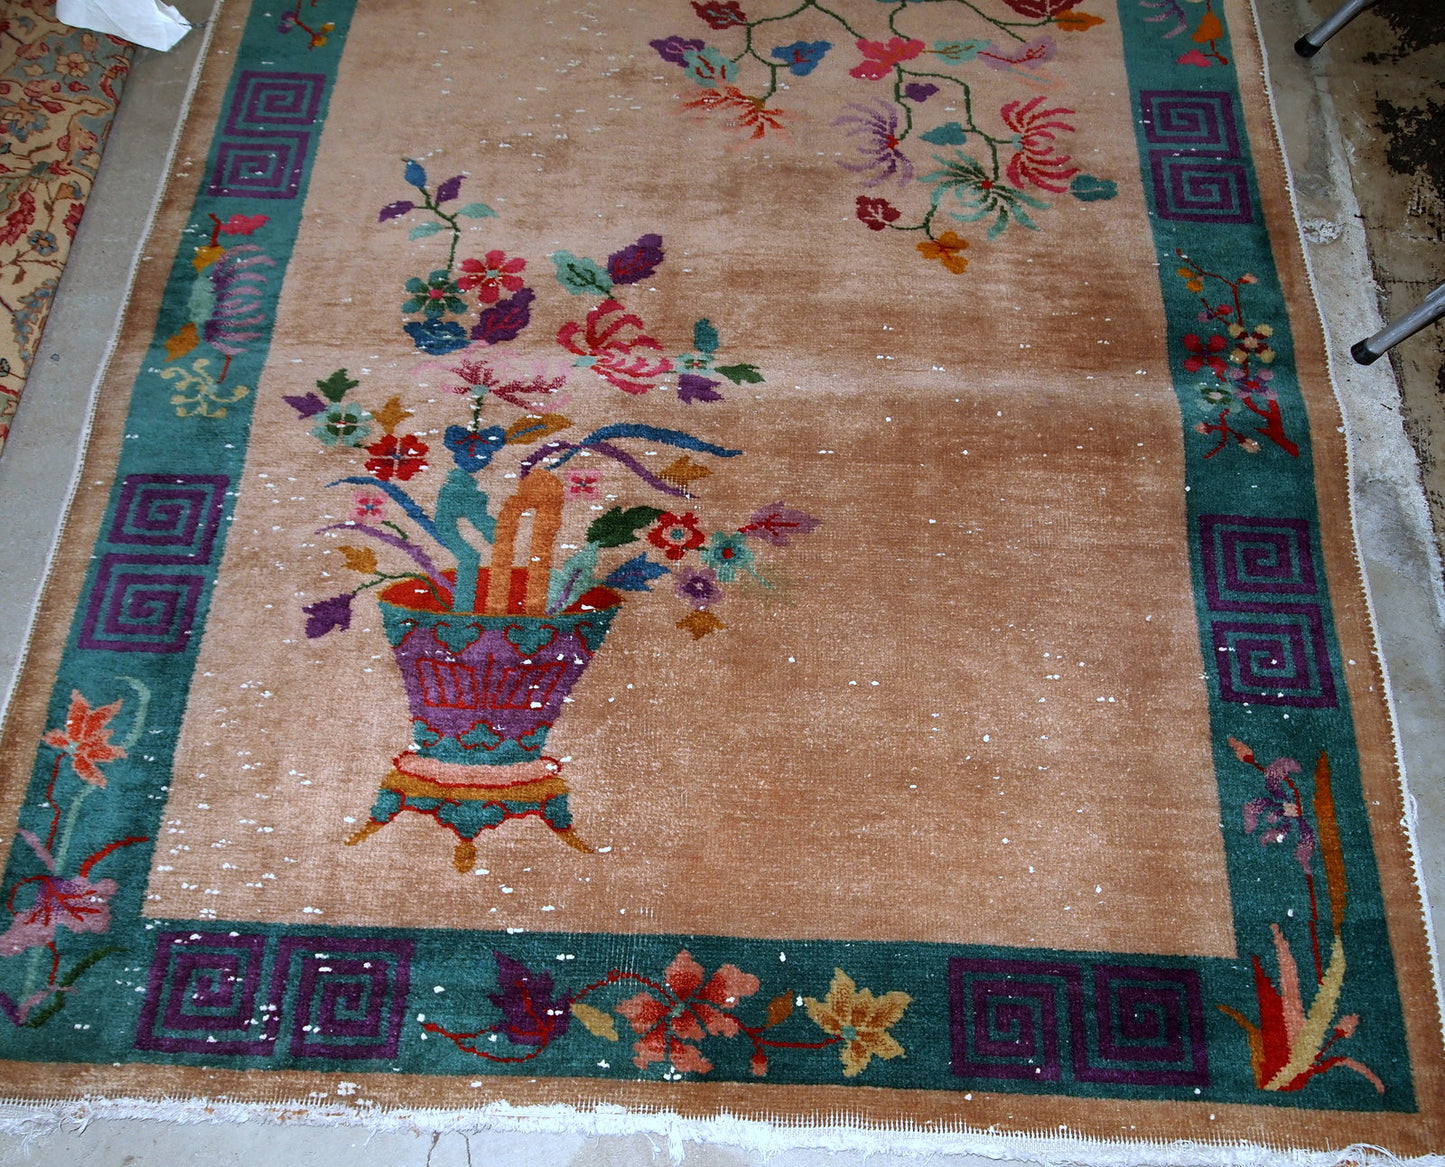 Handmade antique Art Deco Chinese rug in peach shade and decorative vase design. The rug is in original condition.